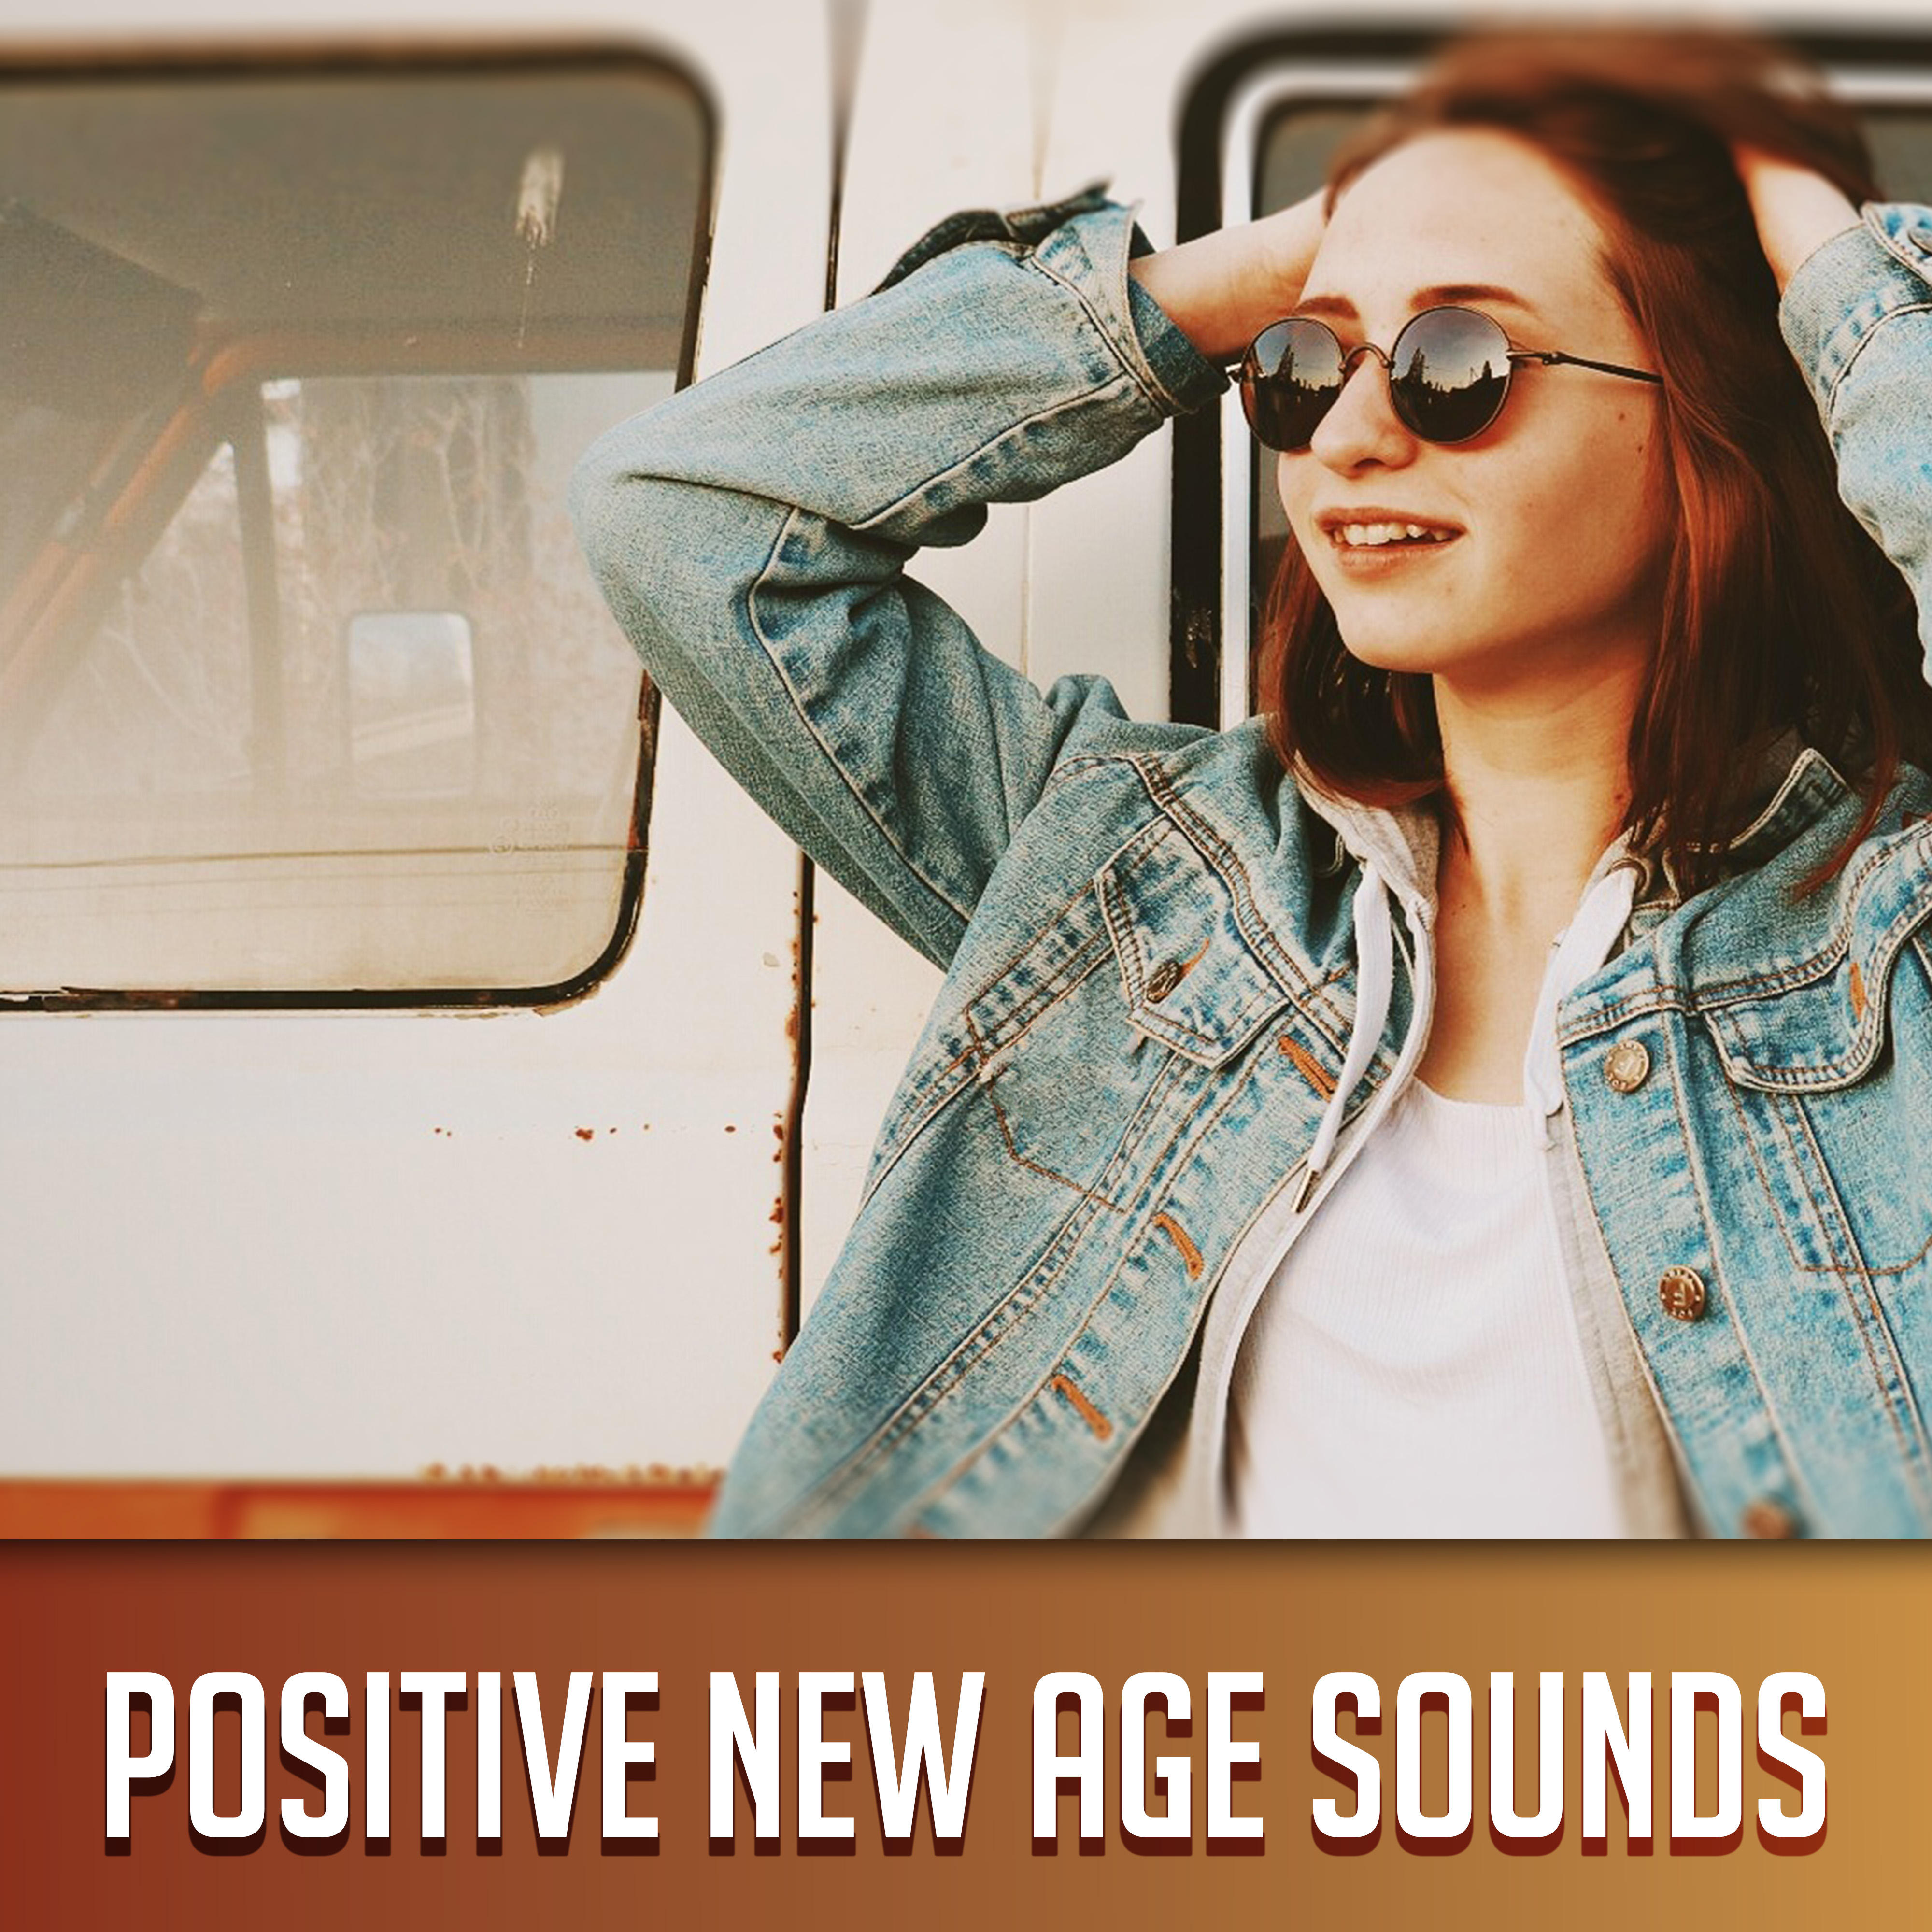 Positive New Age Sounds  Relaxing Waves, Soothing Sounds, Positive Music, Calm New Age, Rest Yourself